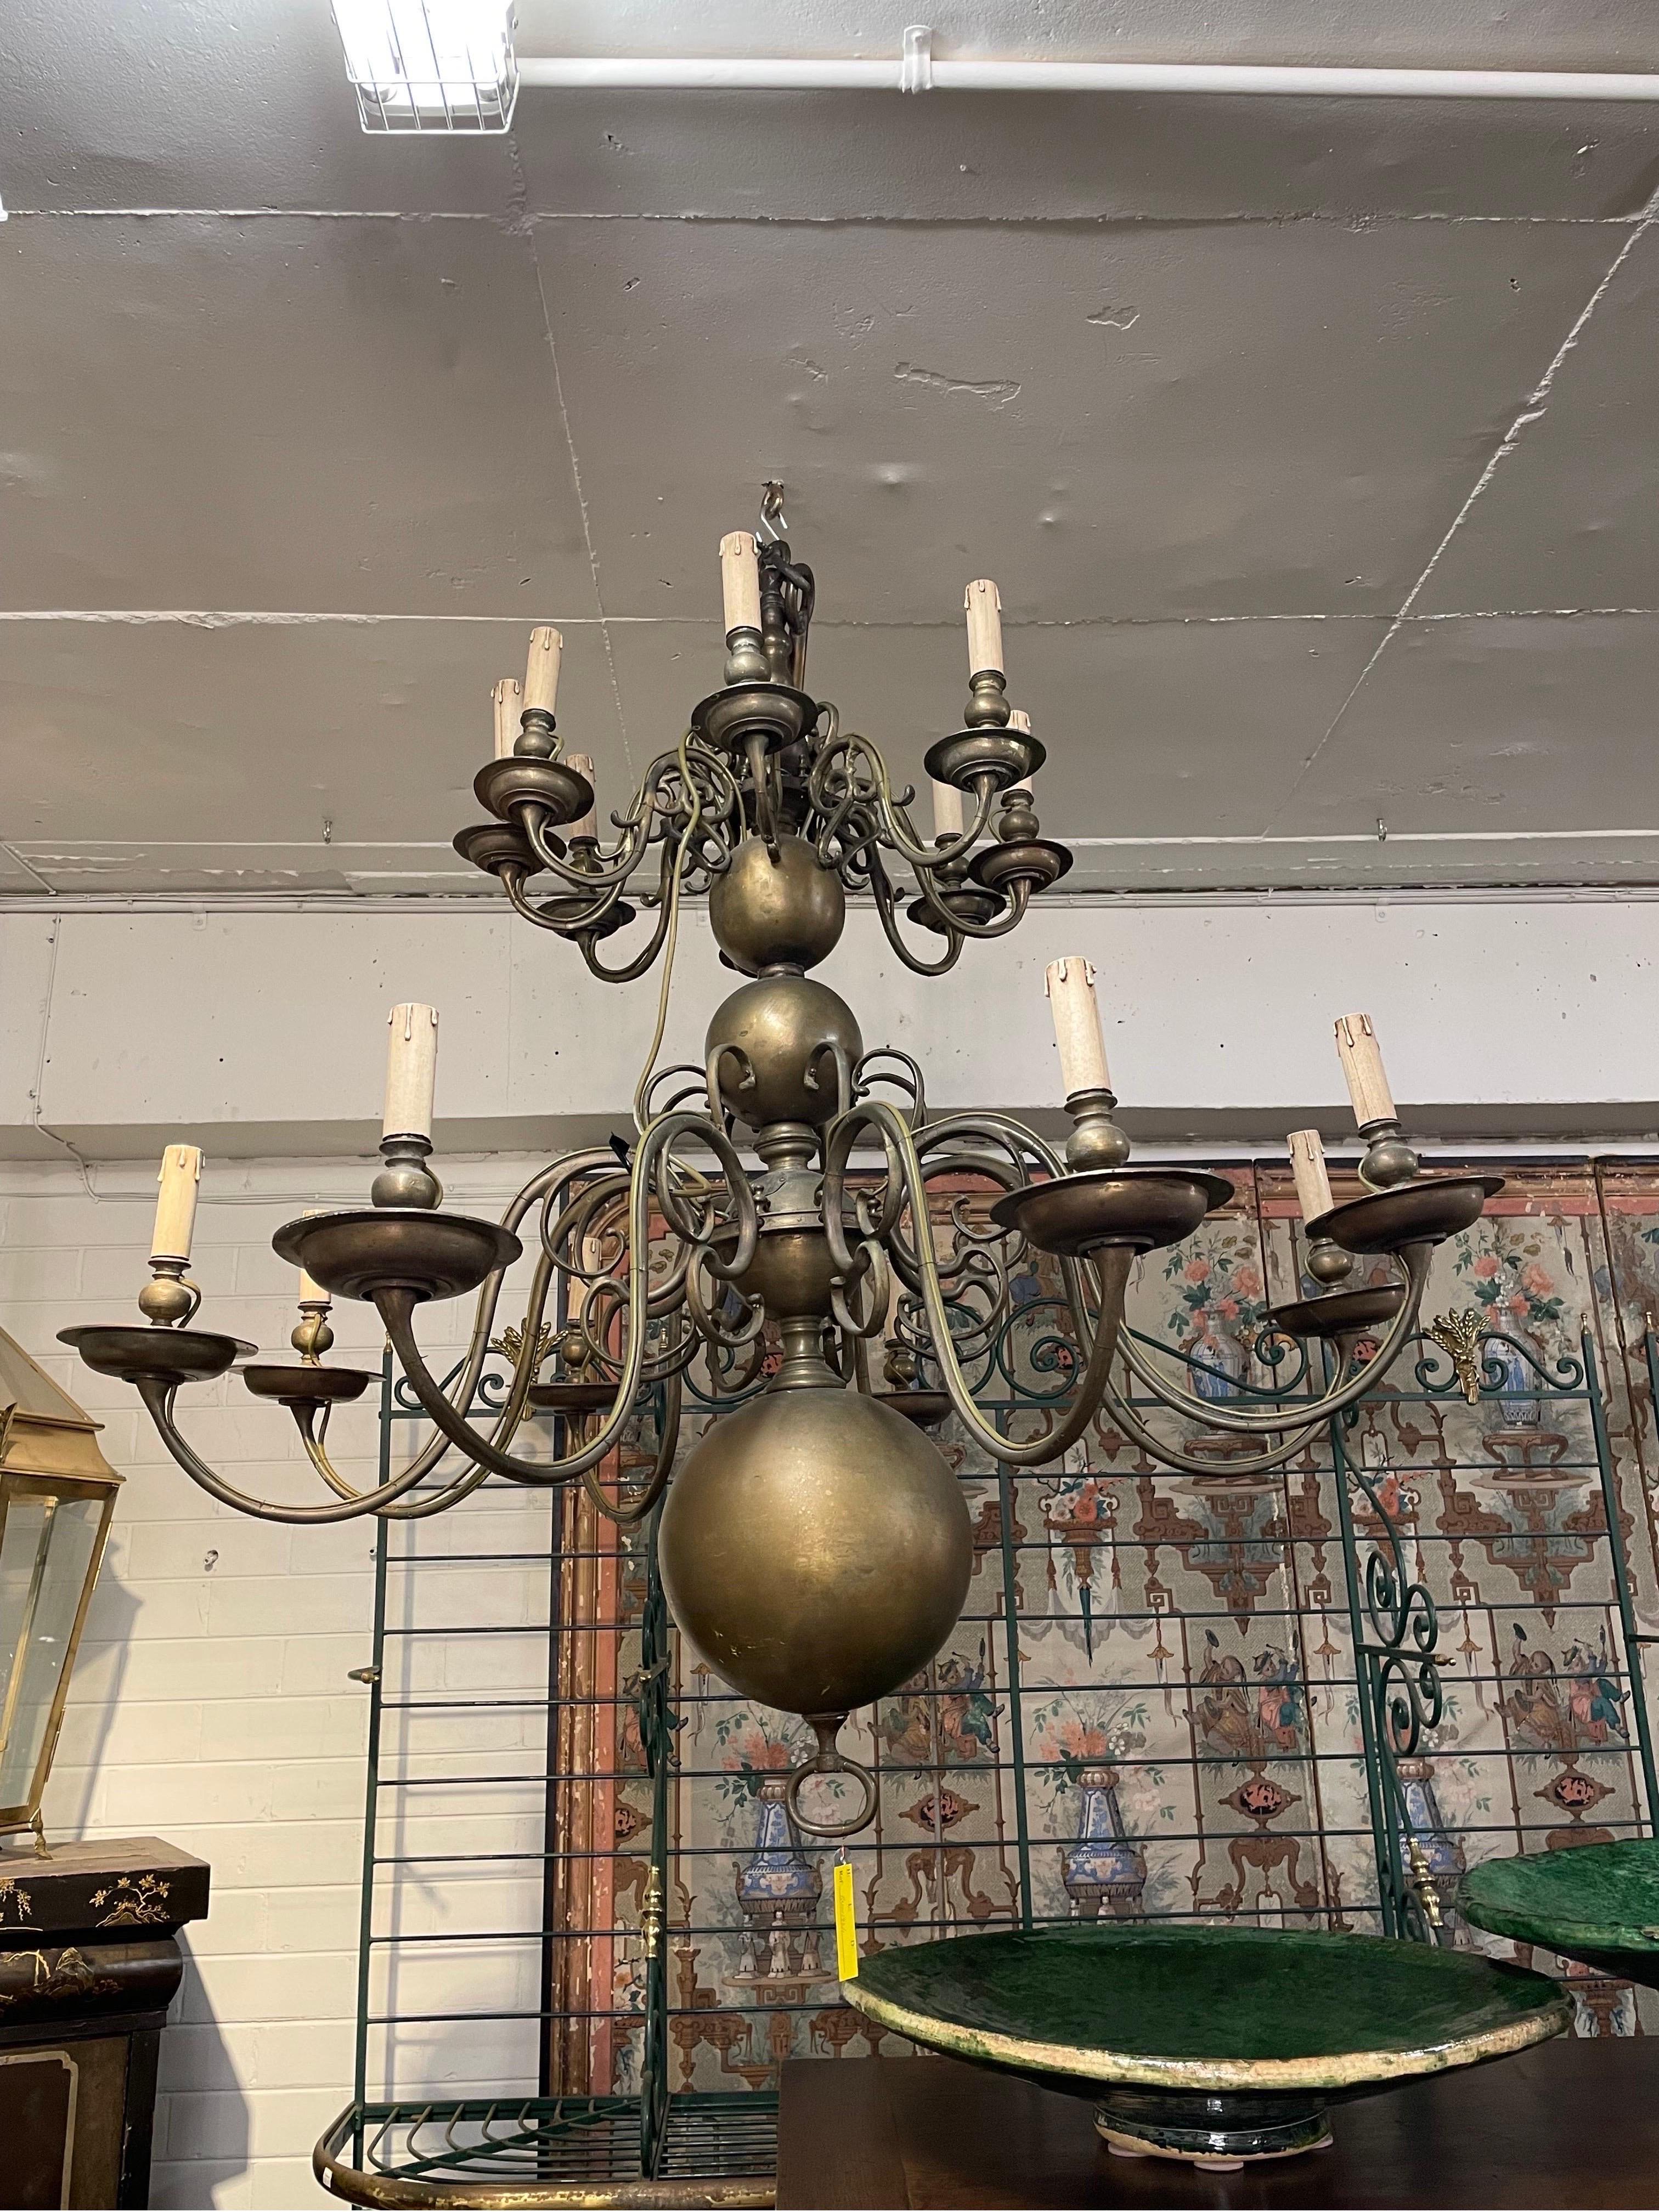 An Antique Dutch Brass Chandelier, Late 19th Century

Of typical form, the sixteen lights arranged in two tiers.

Provenance: Private Victoria Collection.

Condition: Wear consistent with age and use. Overall in good condition.

Weight: